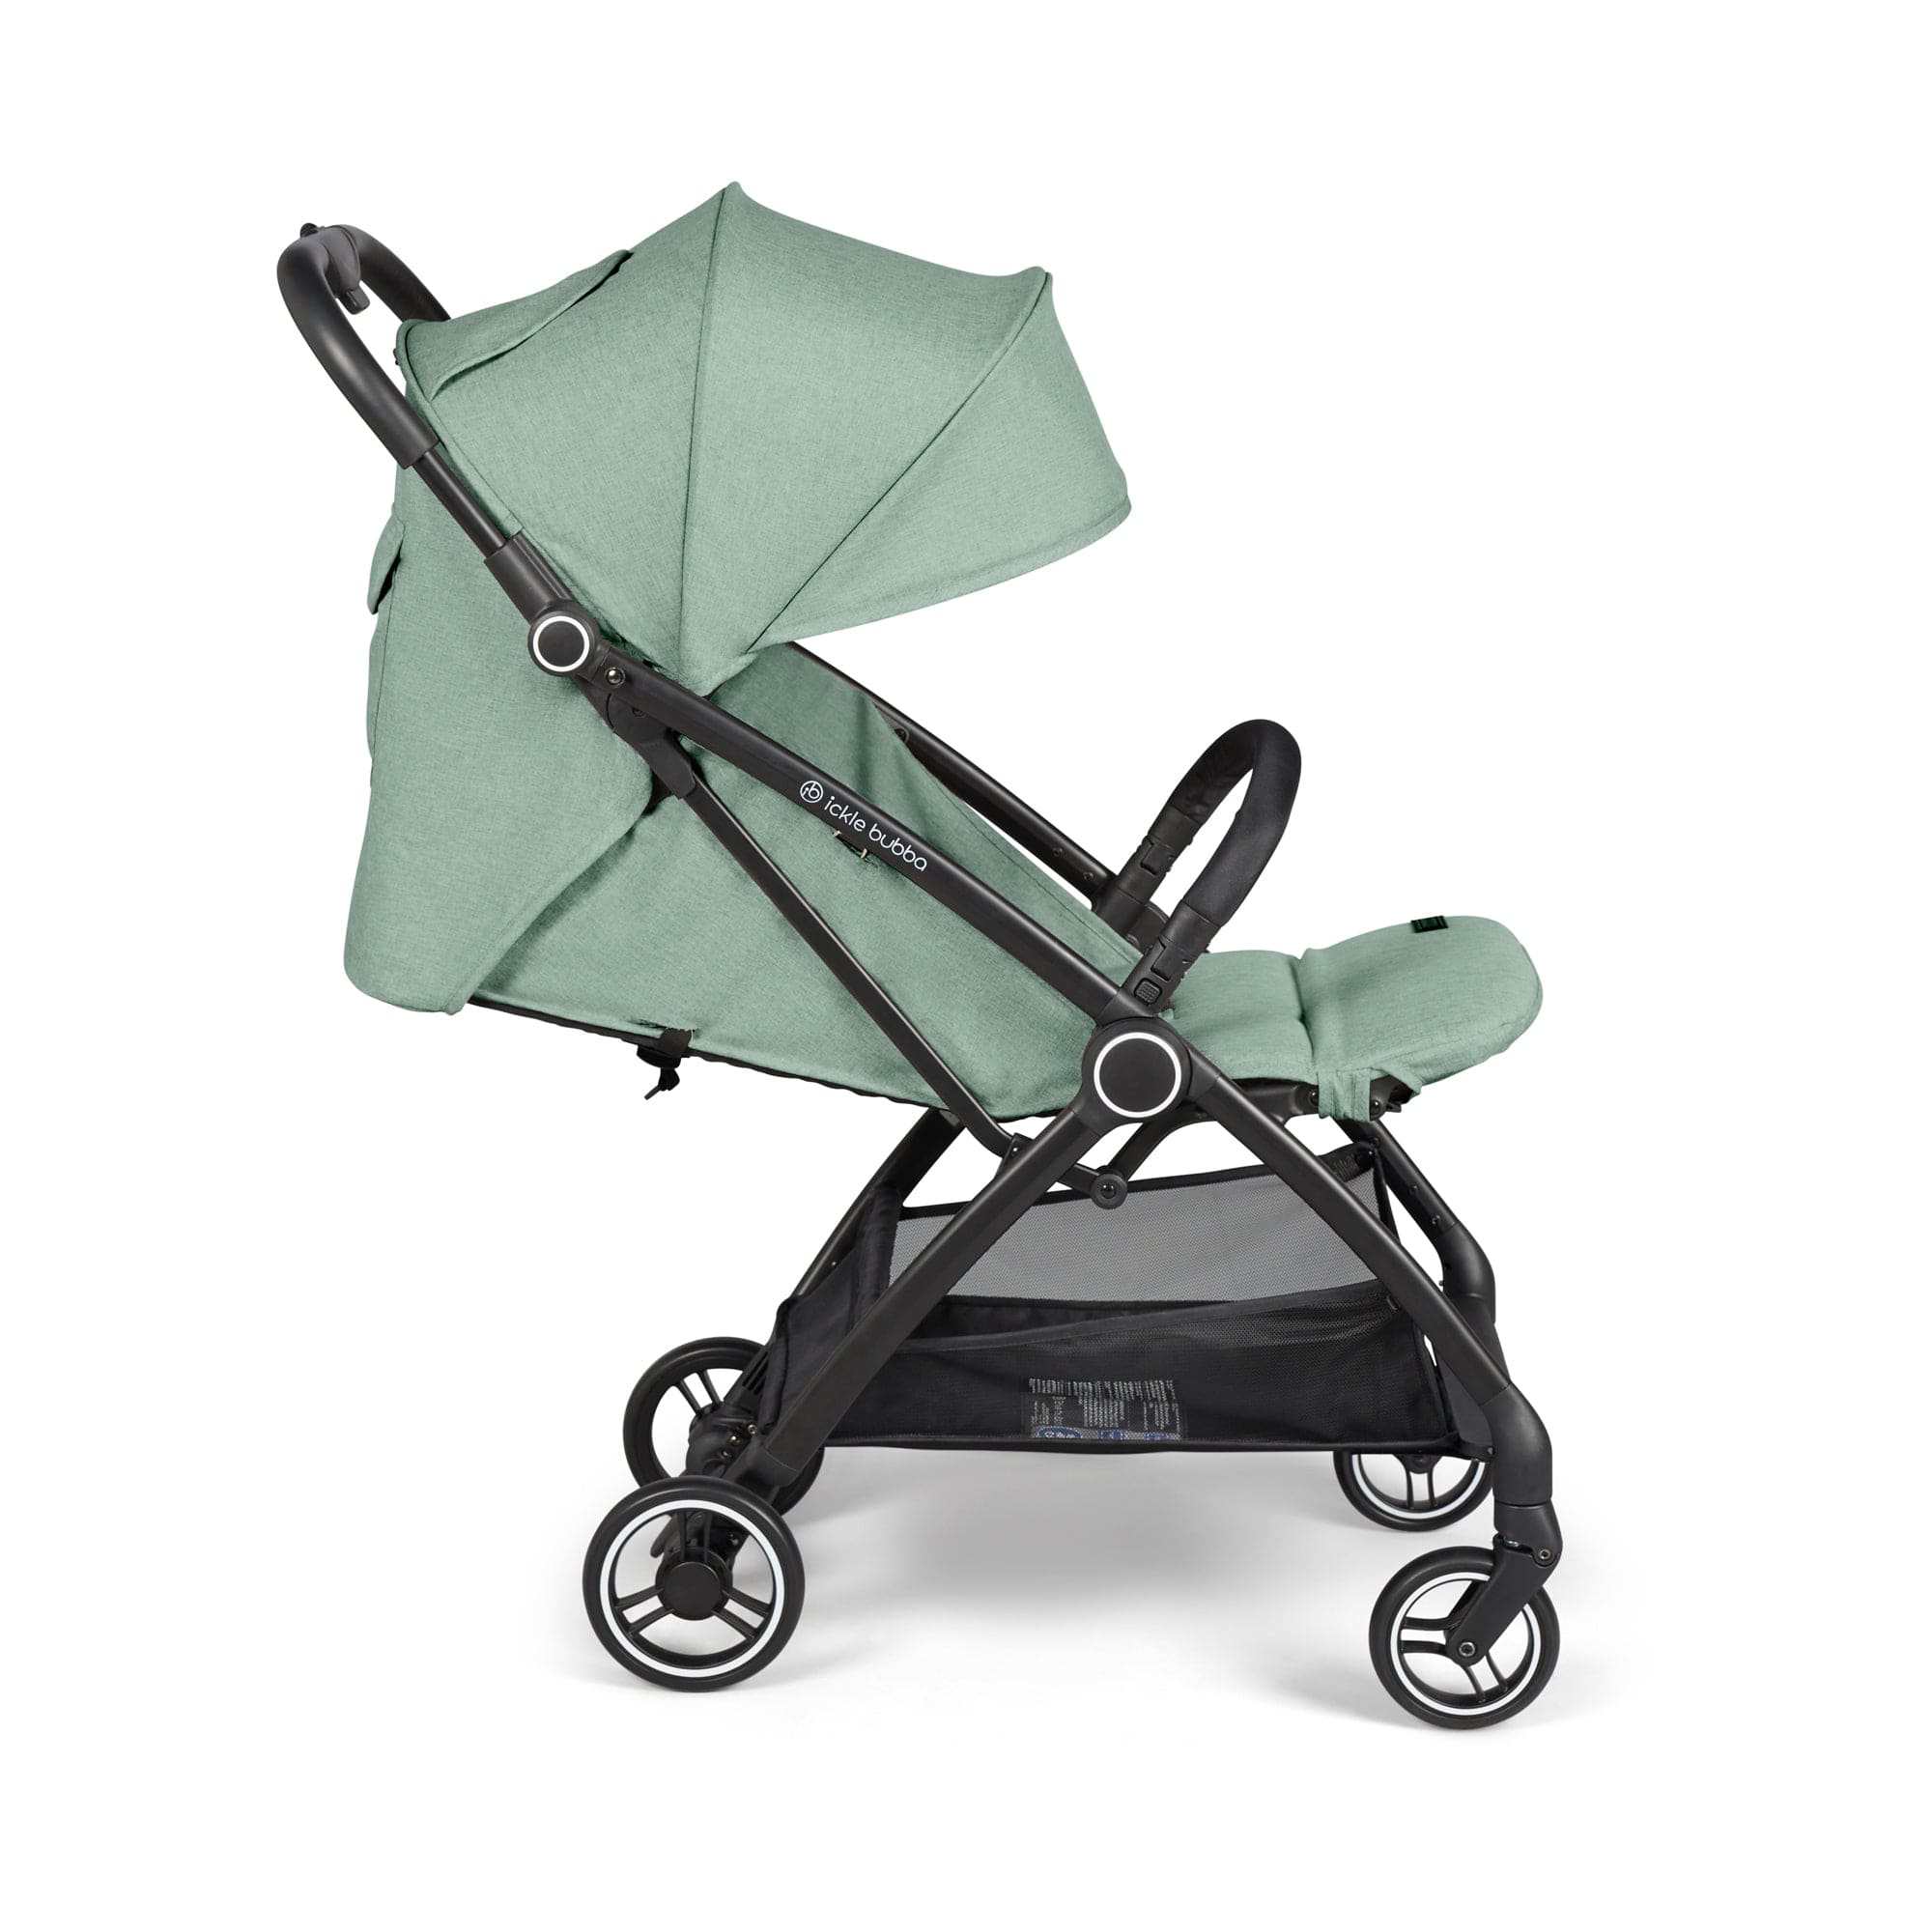 Ickle Bubba Aries Autofold Stroller in Sage Green Pushchairs & Buggies 15-005-100-152 5056515031249